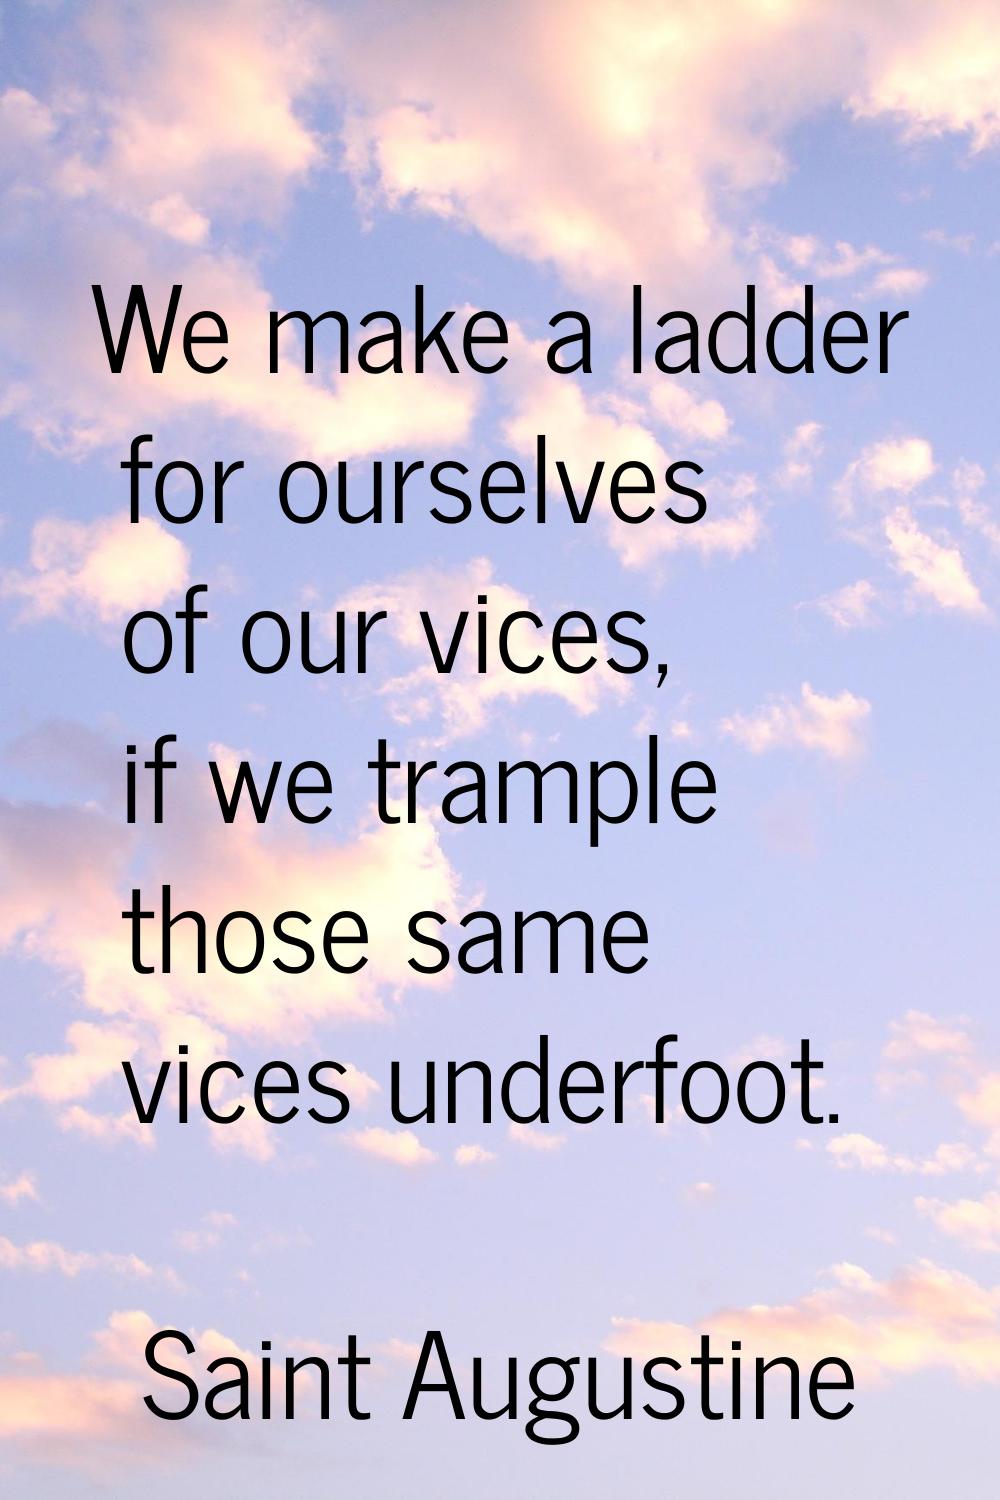 We make a ladder for ourselves of our vices, if we trample those same vices underfoot.